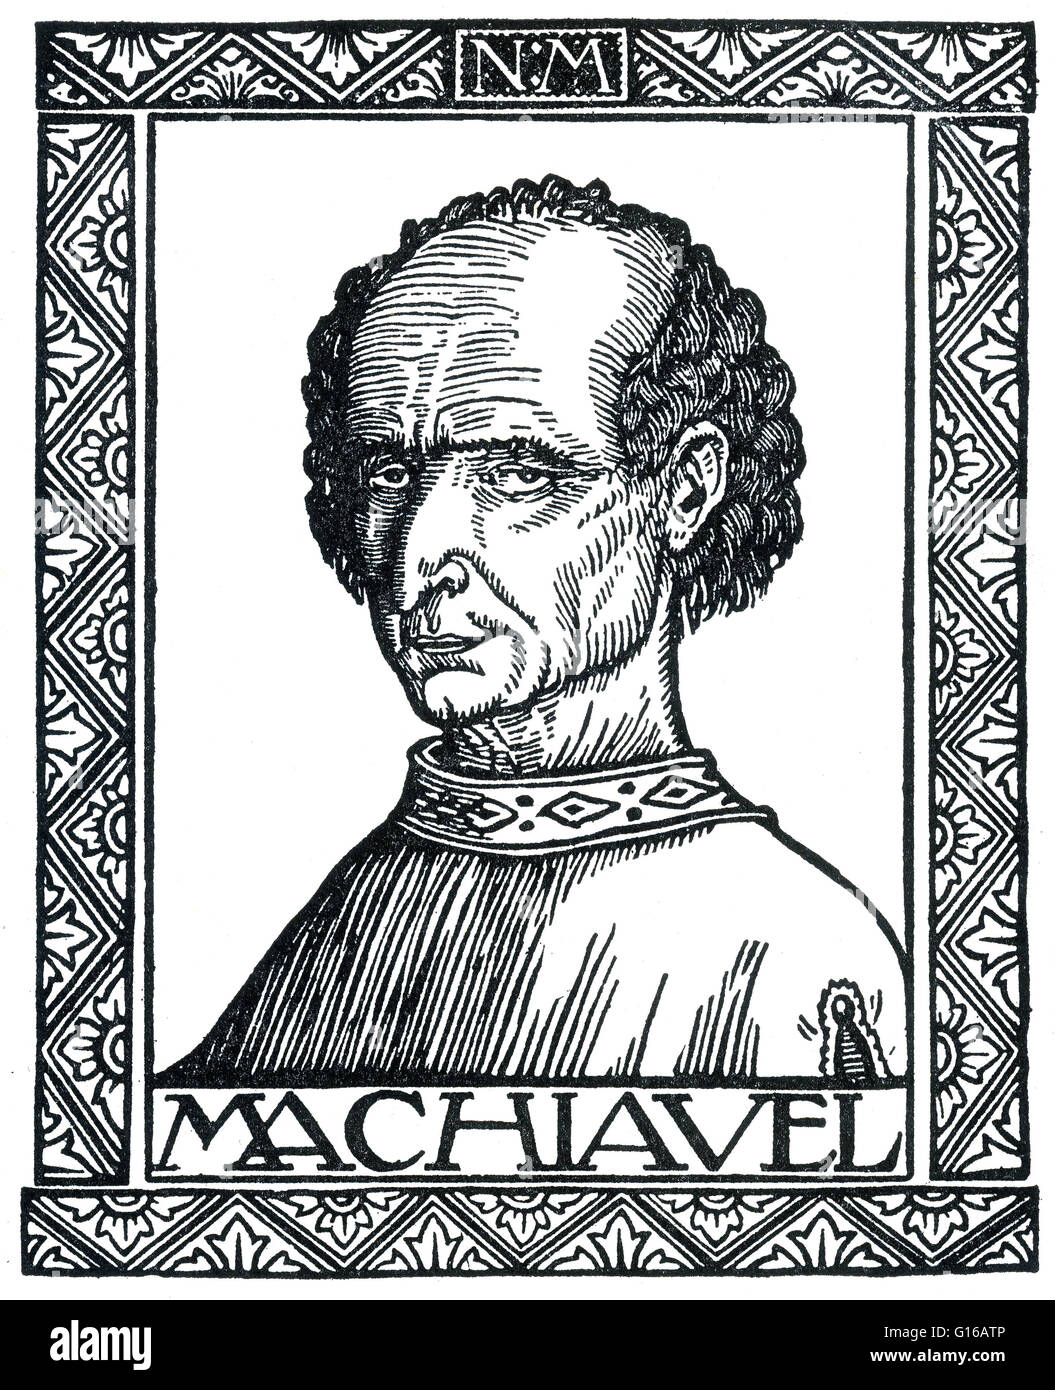 Niccolo di Bernardo dei Machiavelli (May 3, 1469 - June 21,1527) was an Italian historian, politician, diplomat, philosopher, humanist and writer based in Florence during the Renaissance. He was for many years an official in the Florentine Republic, with Stock Photo